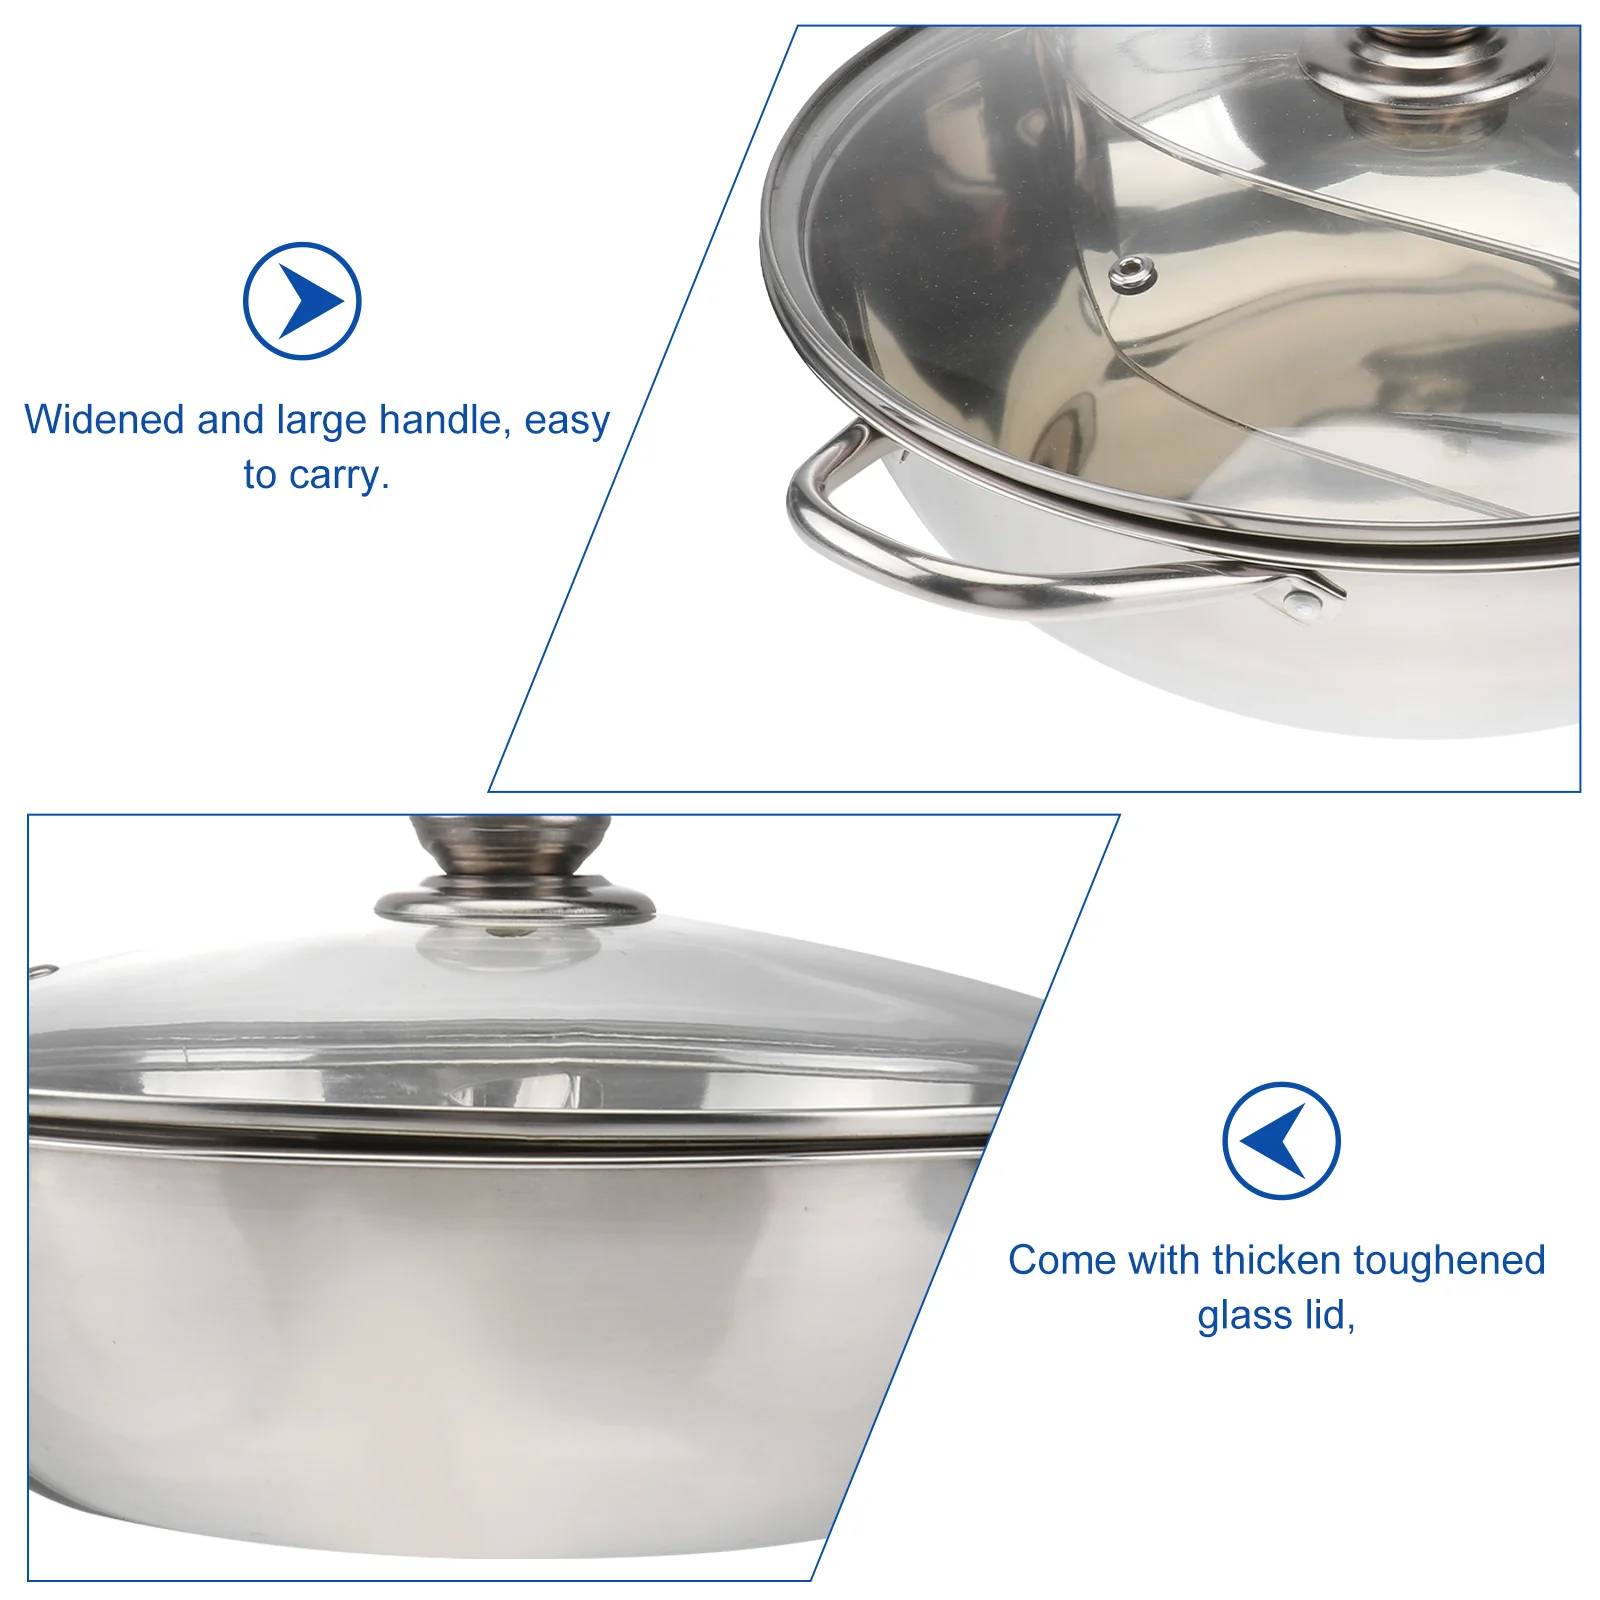 

Divider Hot Pot Shabu Pot: Stainless Steel Divided Pot with Lid 30cm for Induction Cooktop Gas Stove Dual Sided Soup Cookware